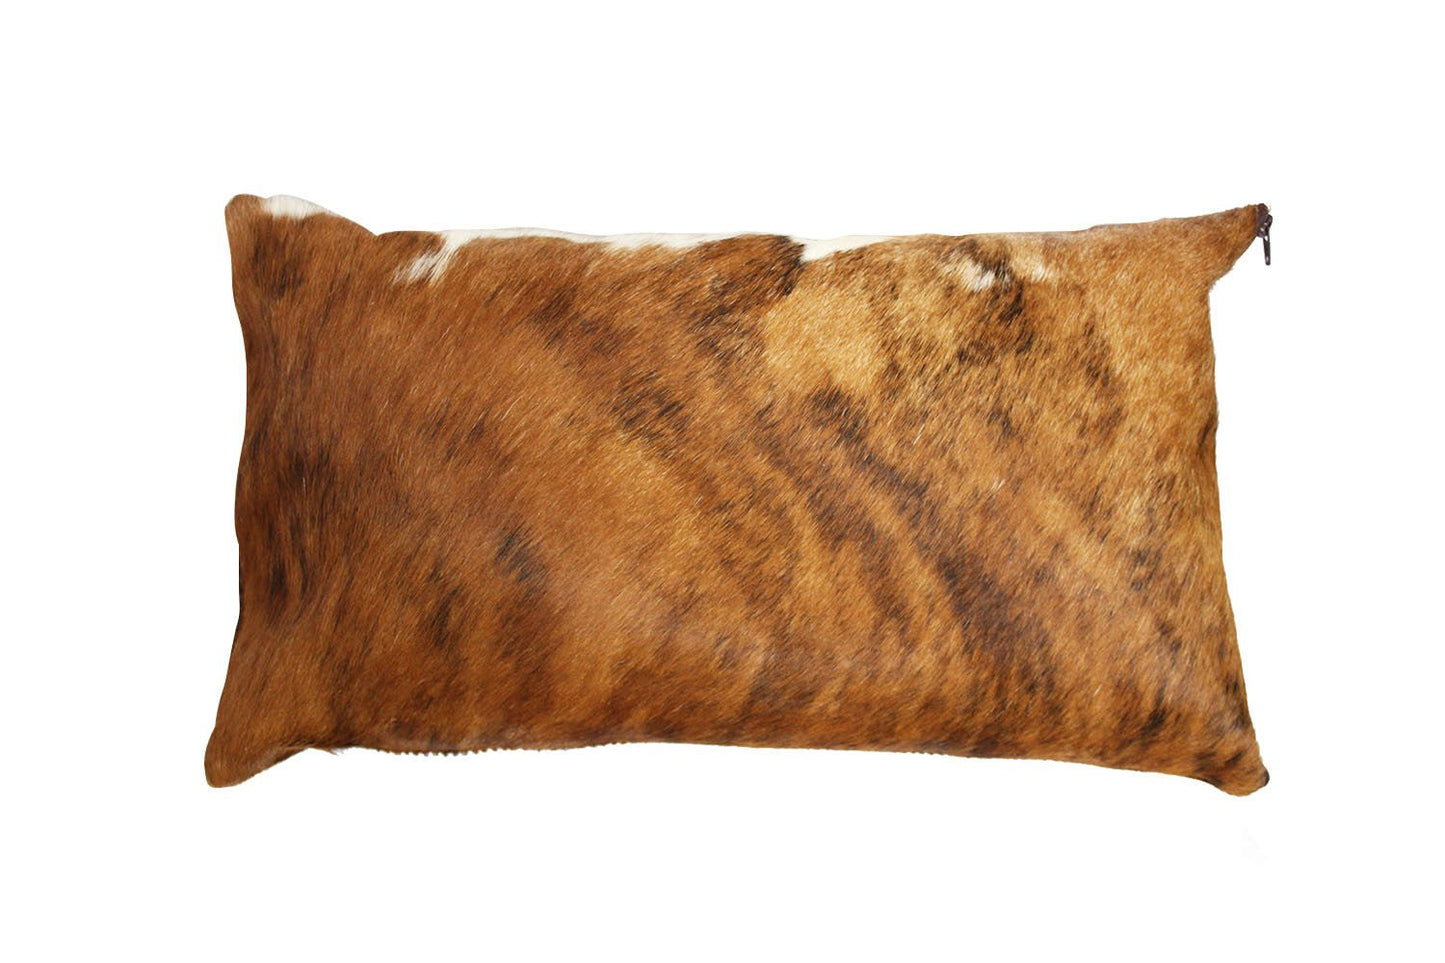 Tri-colored Cowhide Pillow Case - Rodeo Cowhide Rugs16x16